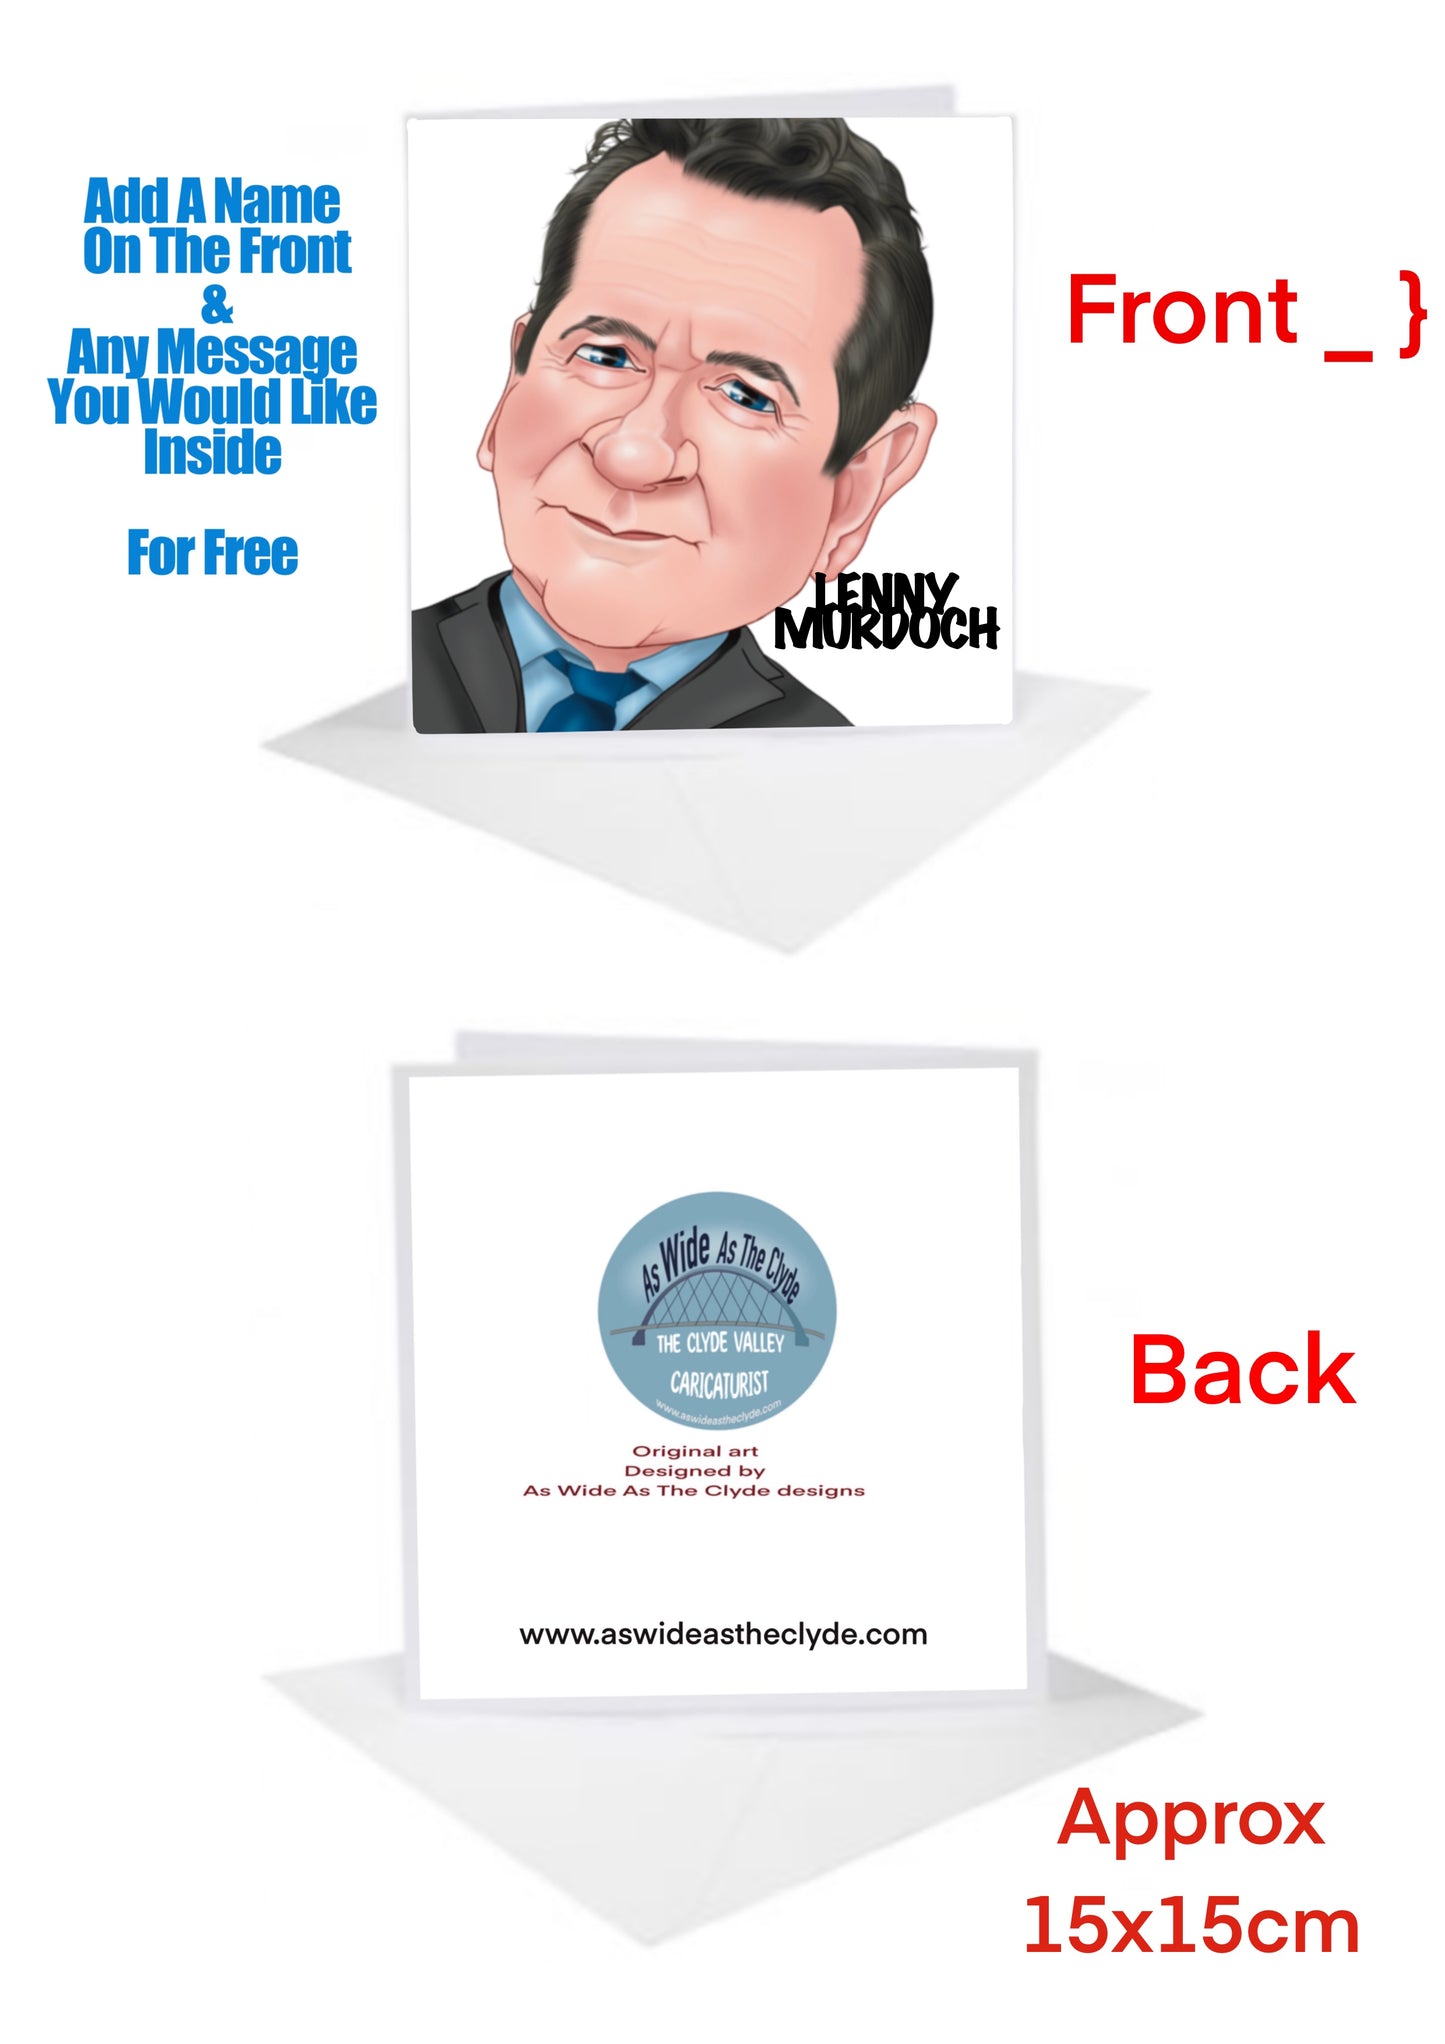 River City Birthday Cards-Cards Lenny Murdoch add details for FREE